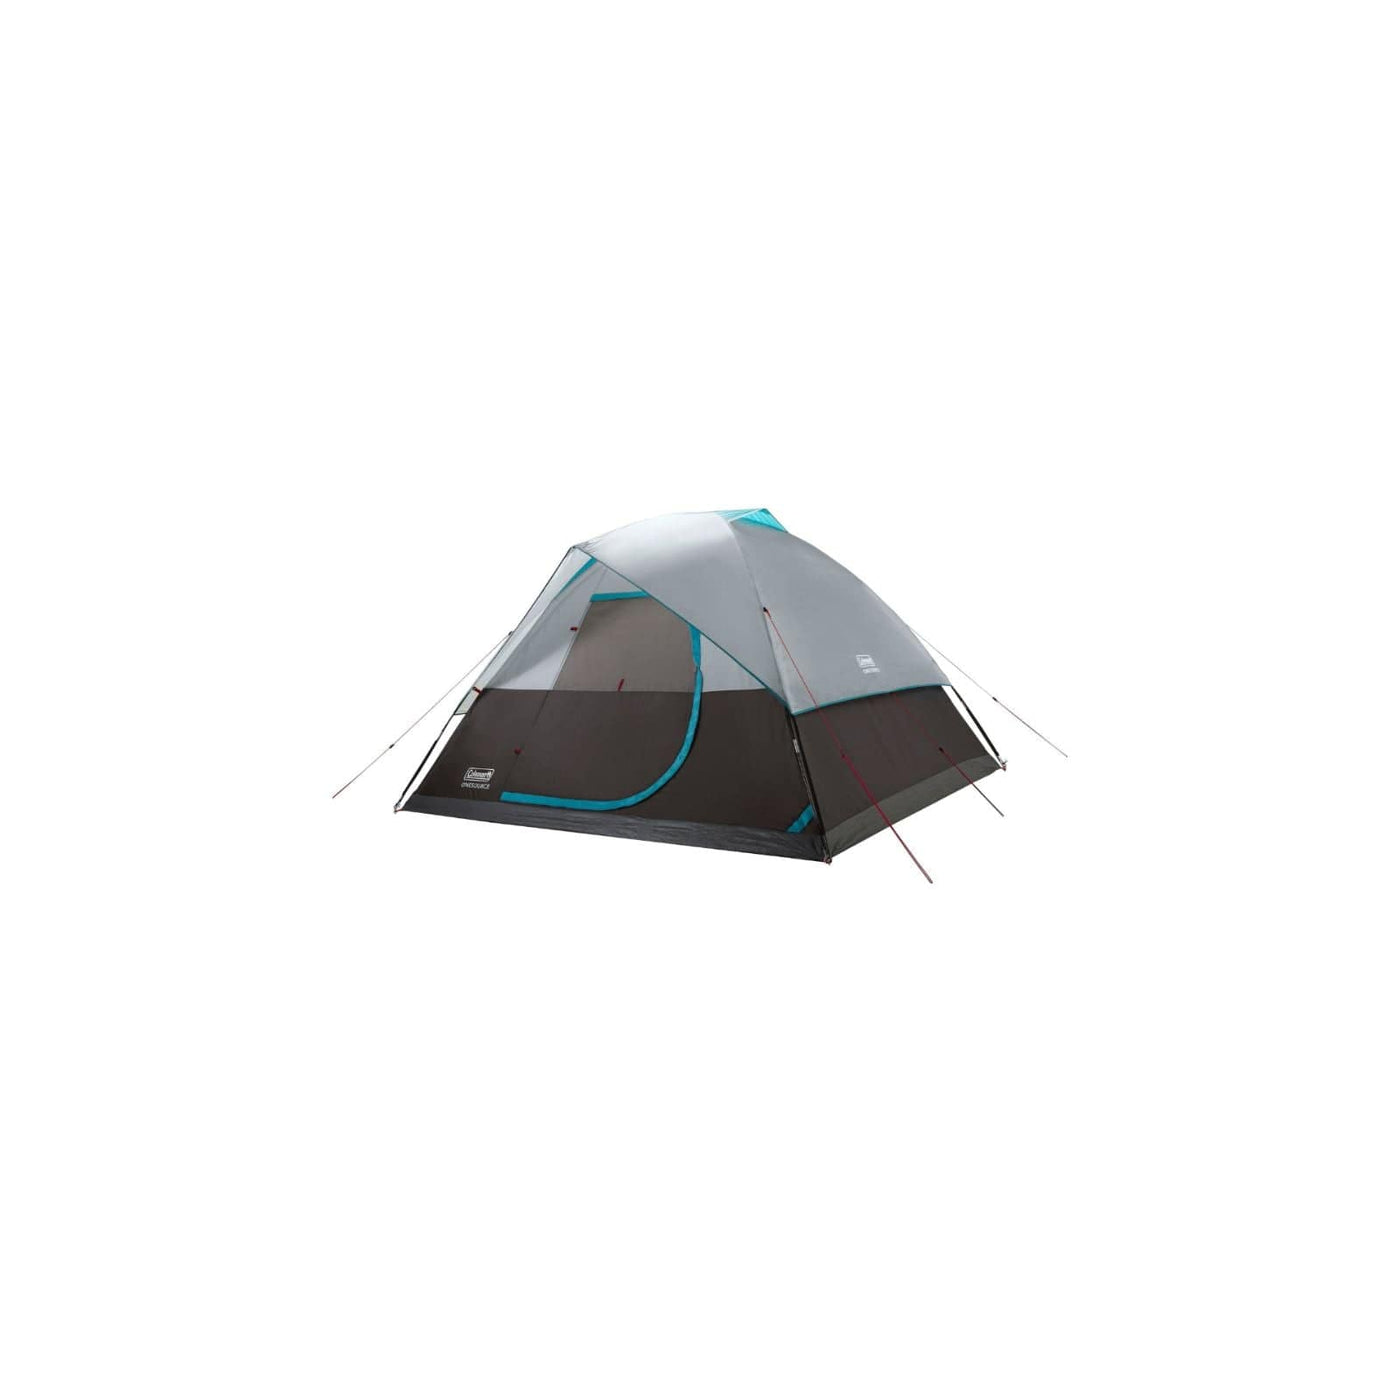 Coleman Coleman Tent Dome Onesource 6P C001 Camping And Outdoor